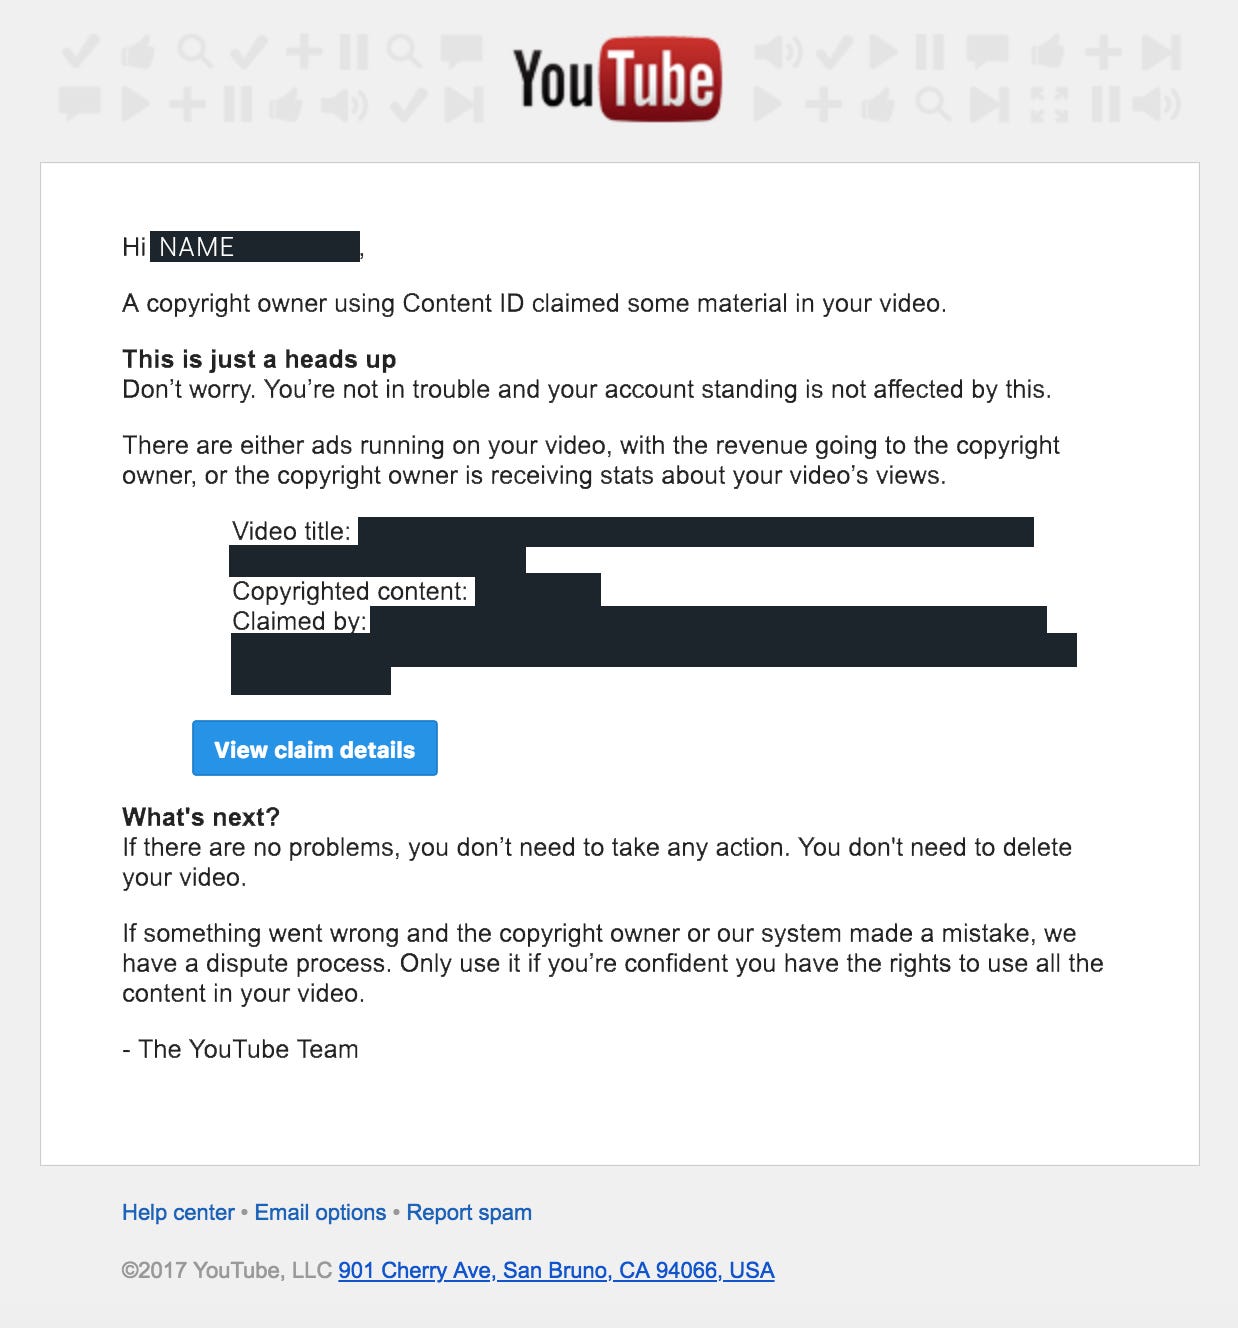 Should I be worried about a copyright claim?